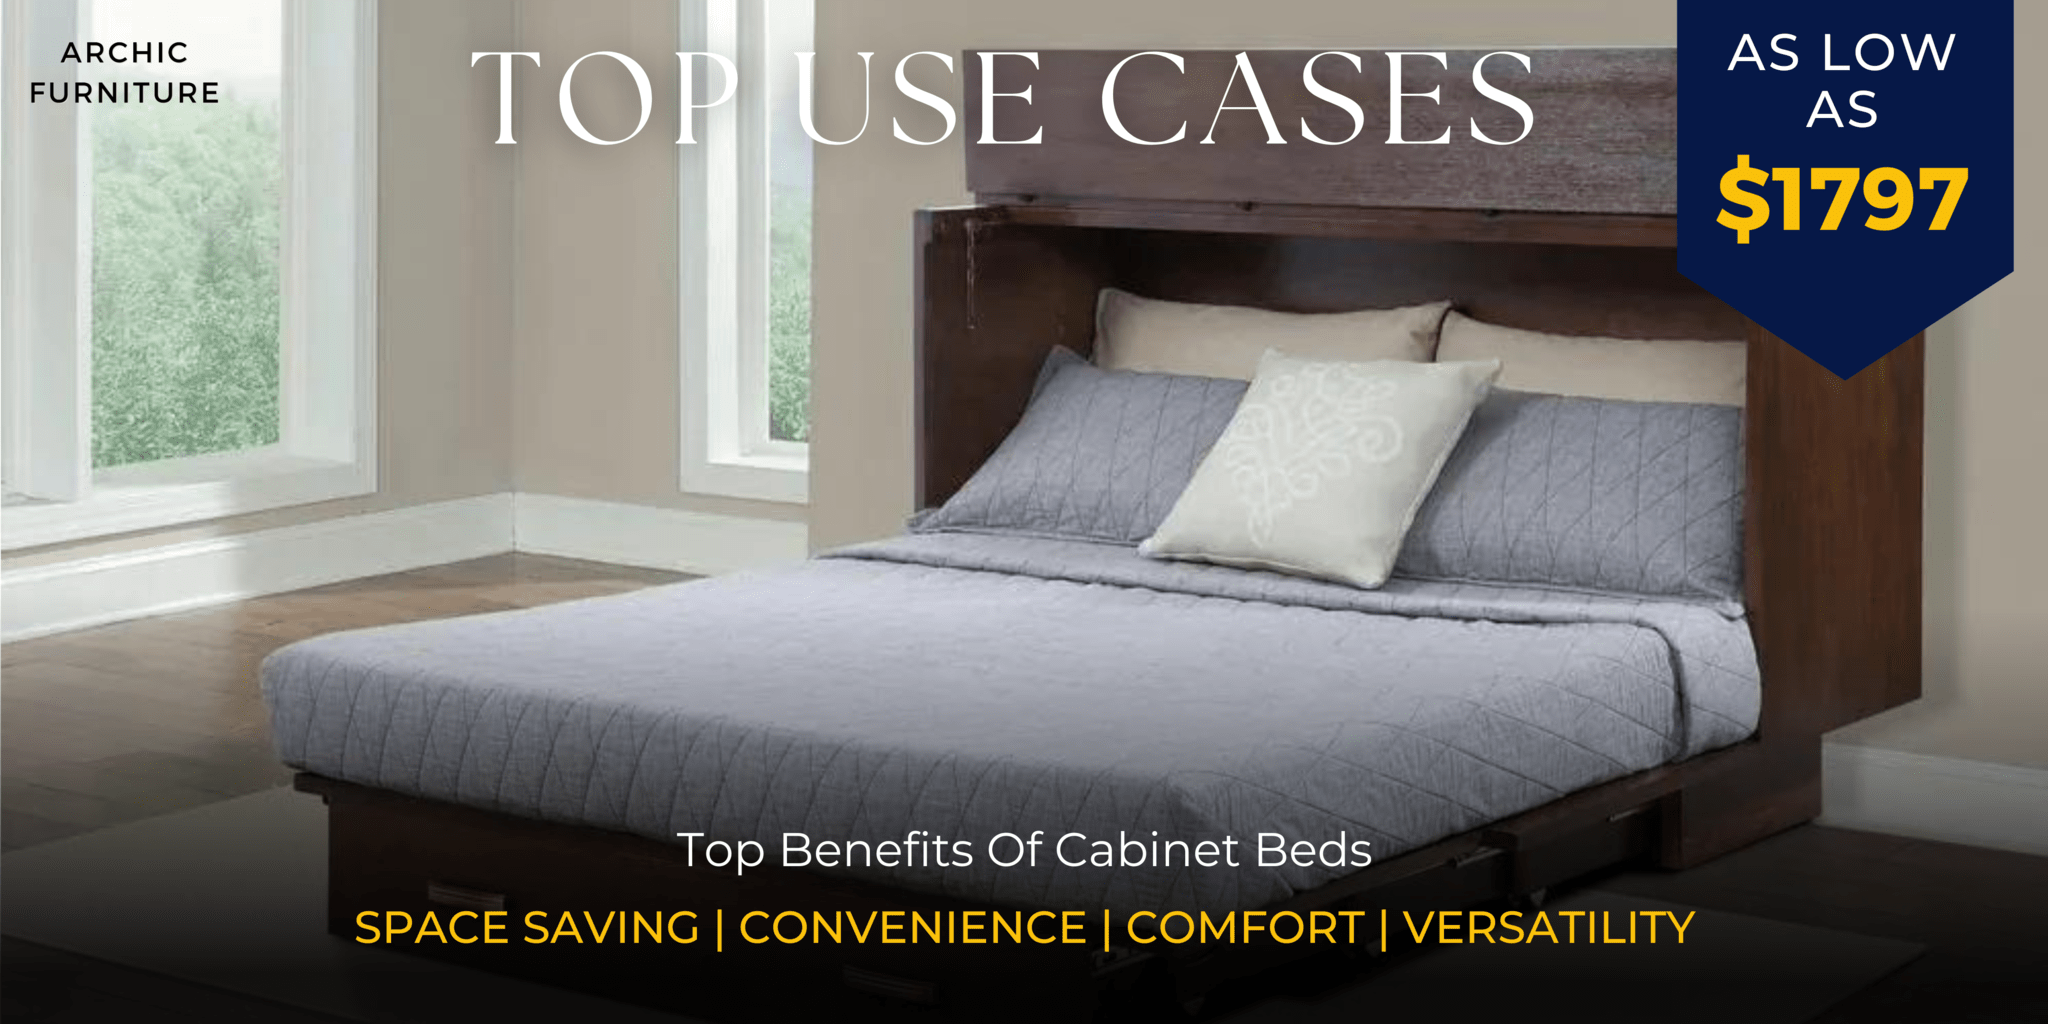 Cabinet Beds - Archic Furniture